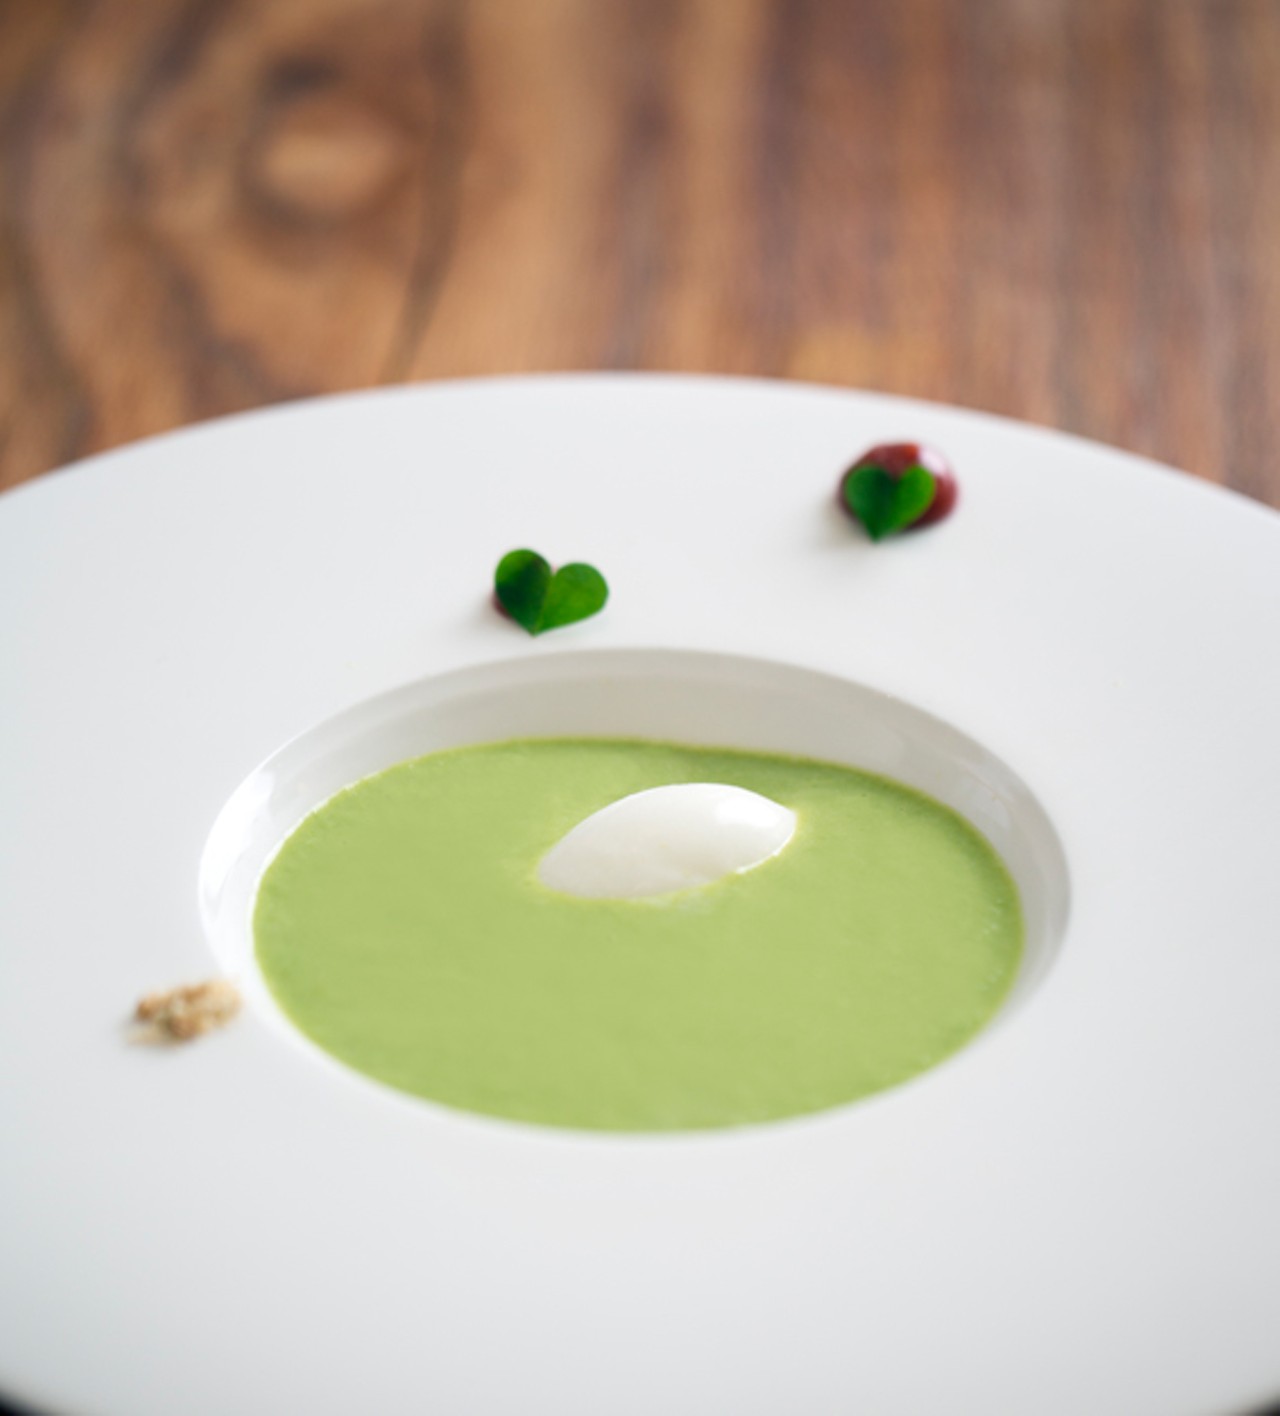 Spring onion soup, made with rhubarb, buckwheat and wood sorrel.